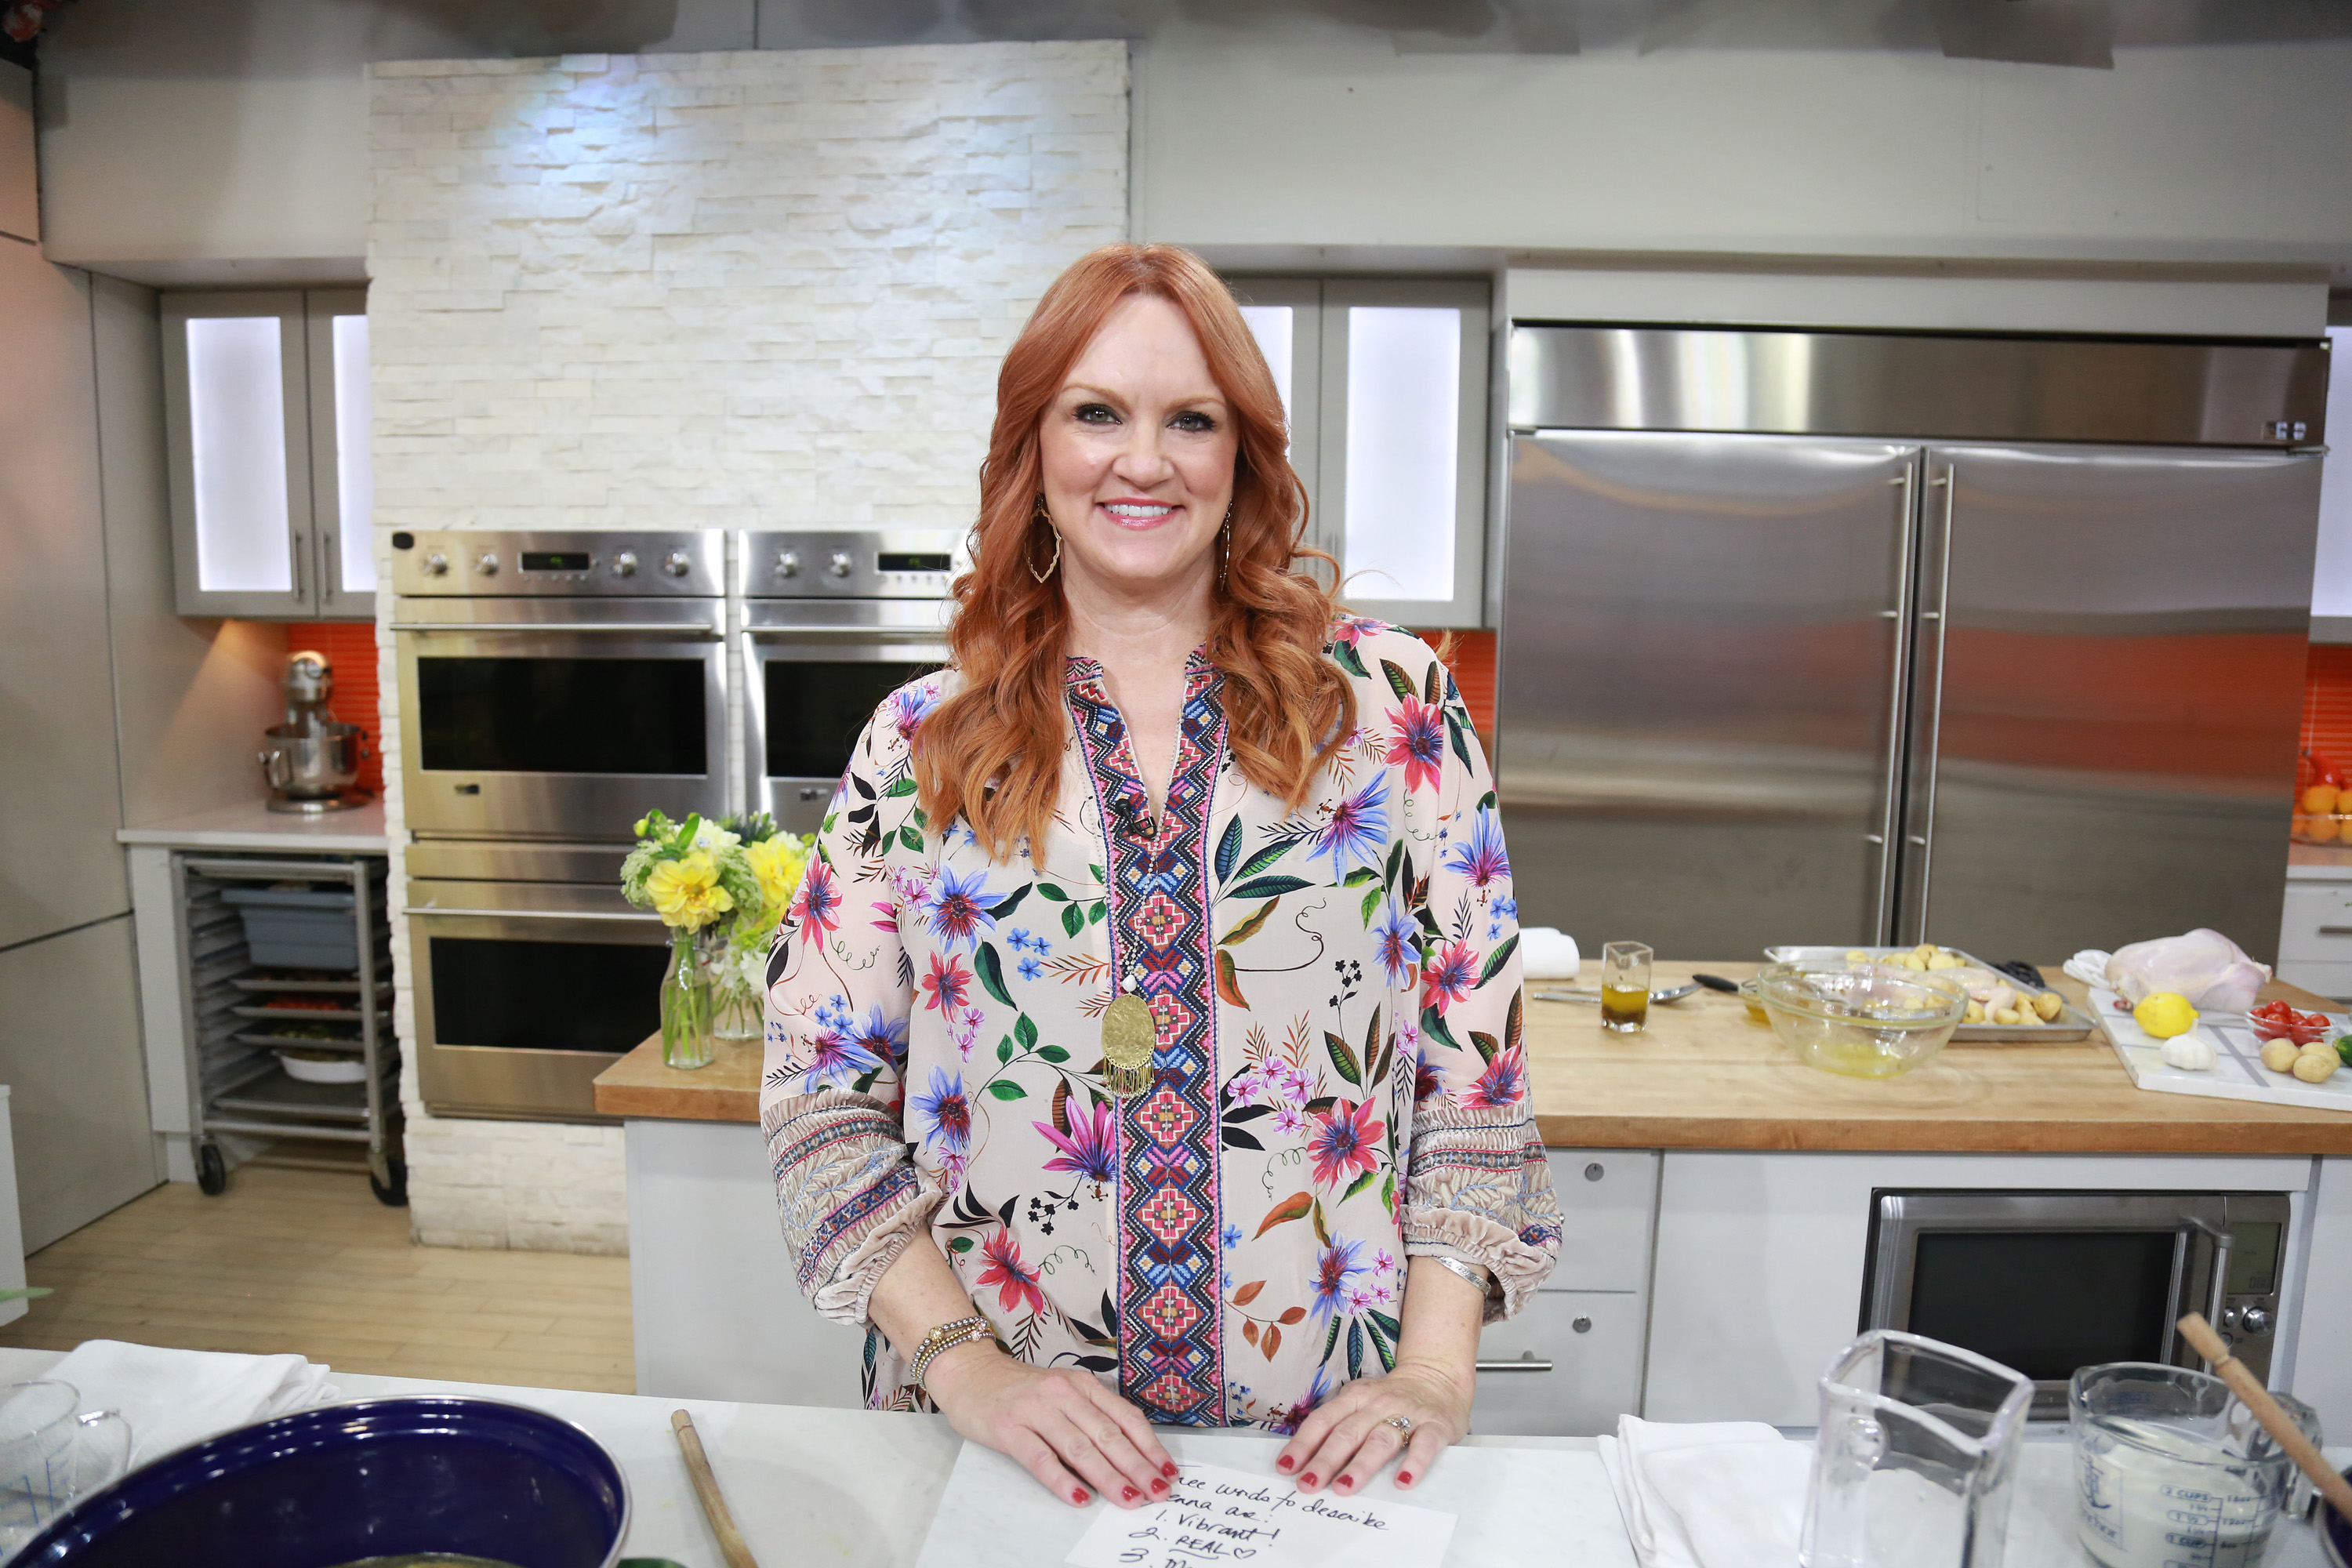 Ree Drummond poses in the Today show kitchen while smiling and wearing a floral blouse. 